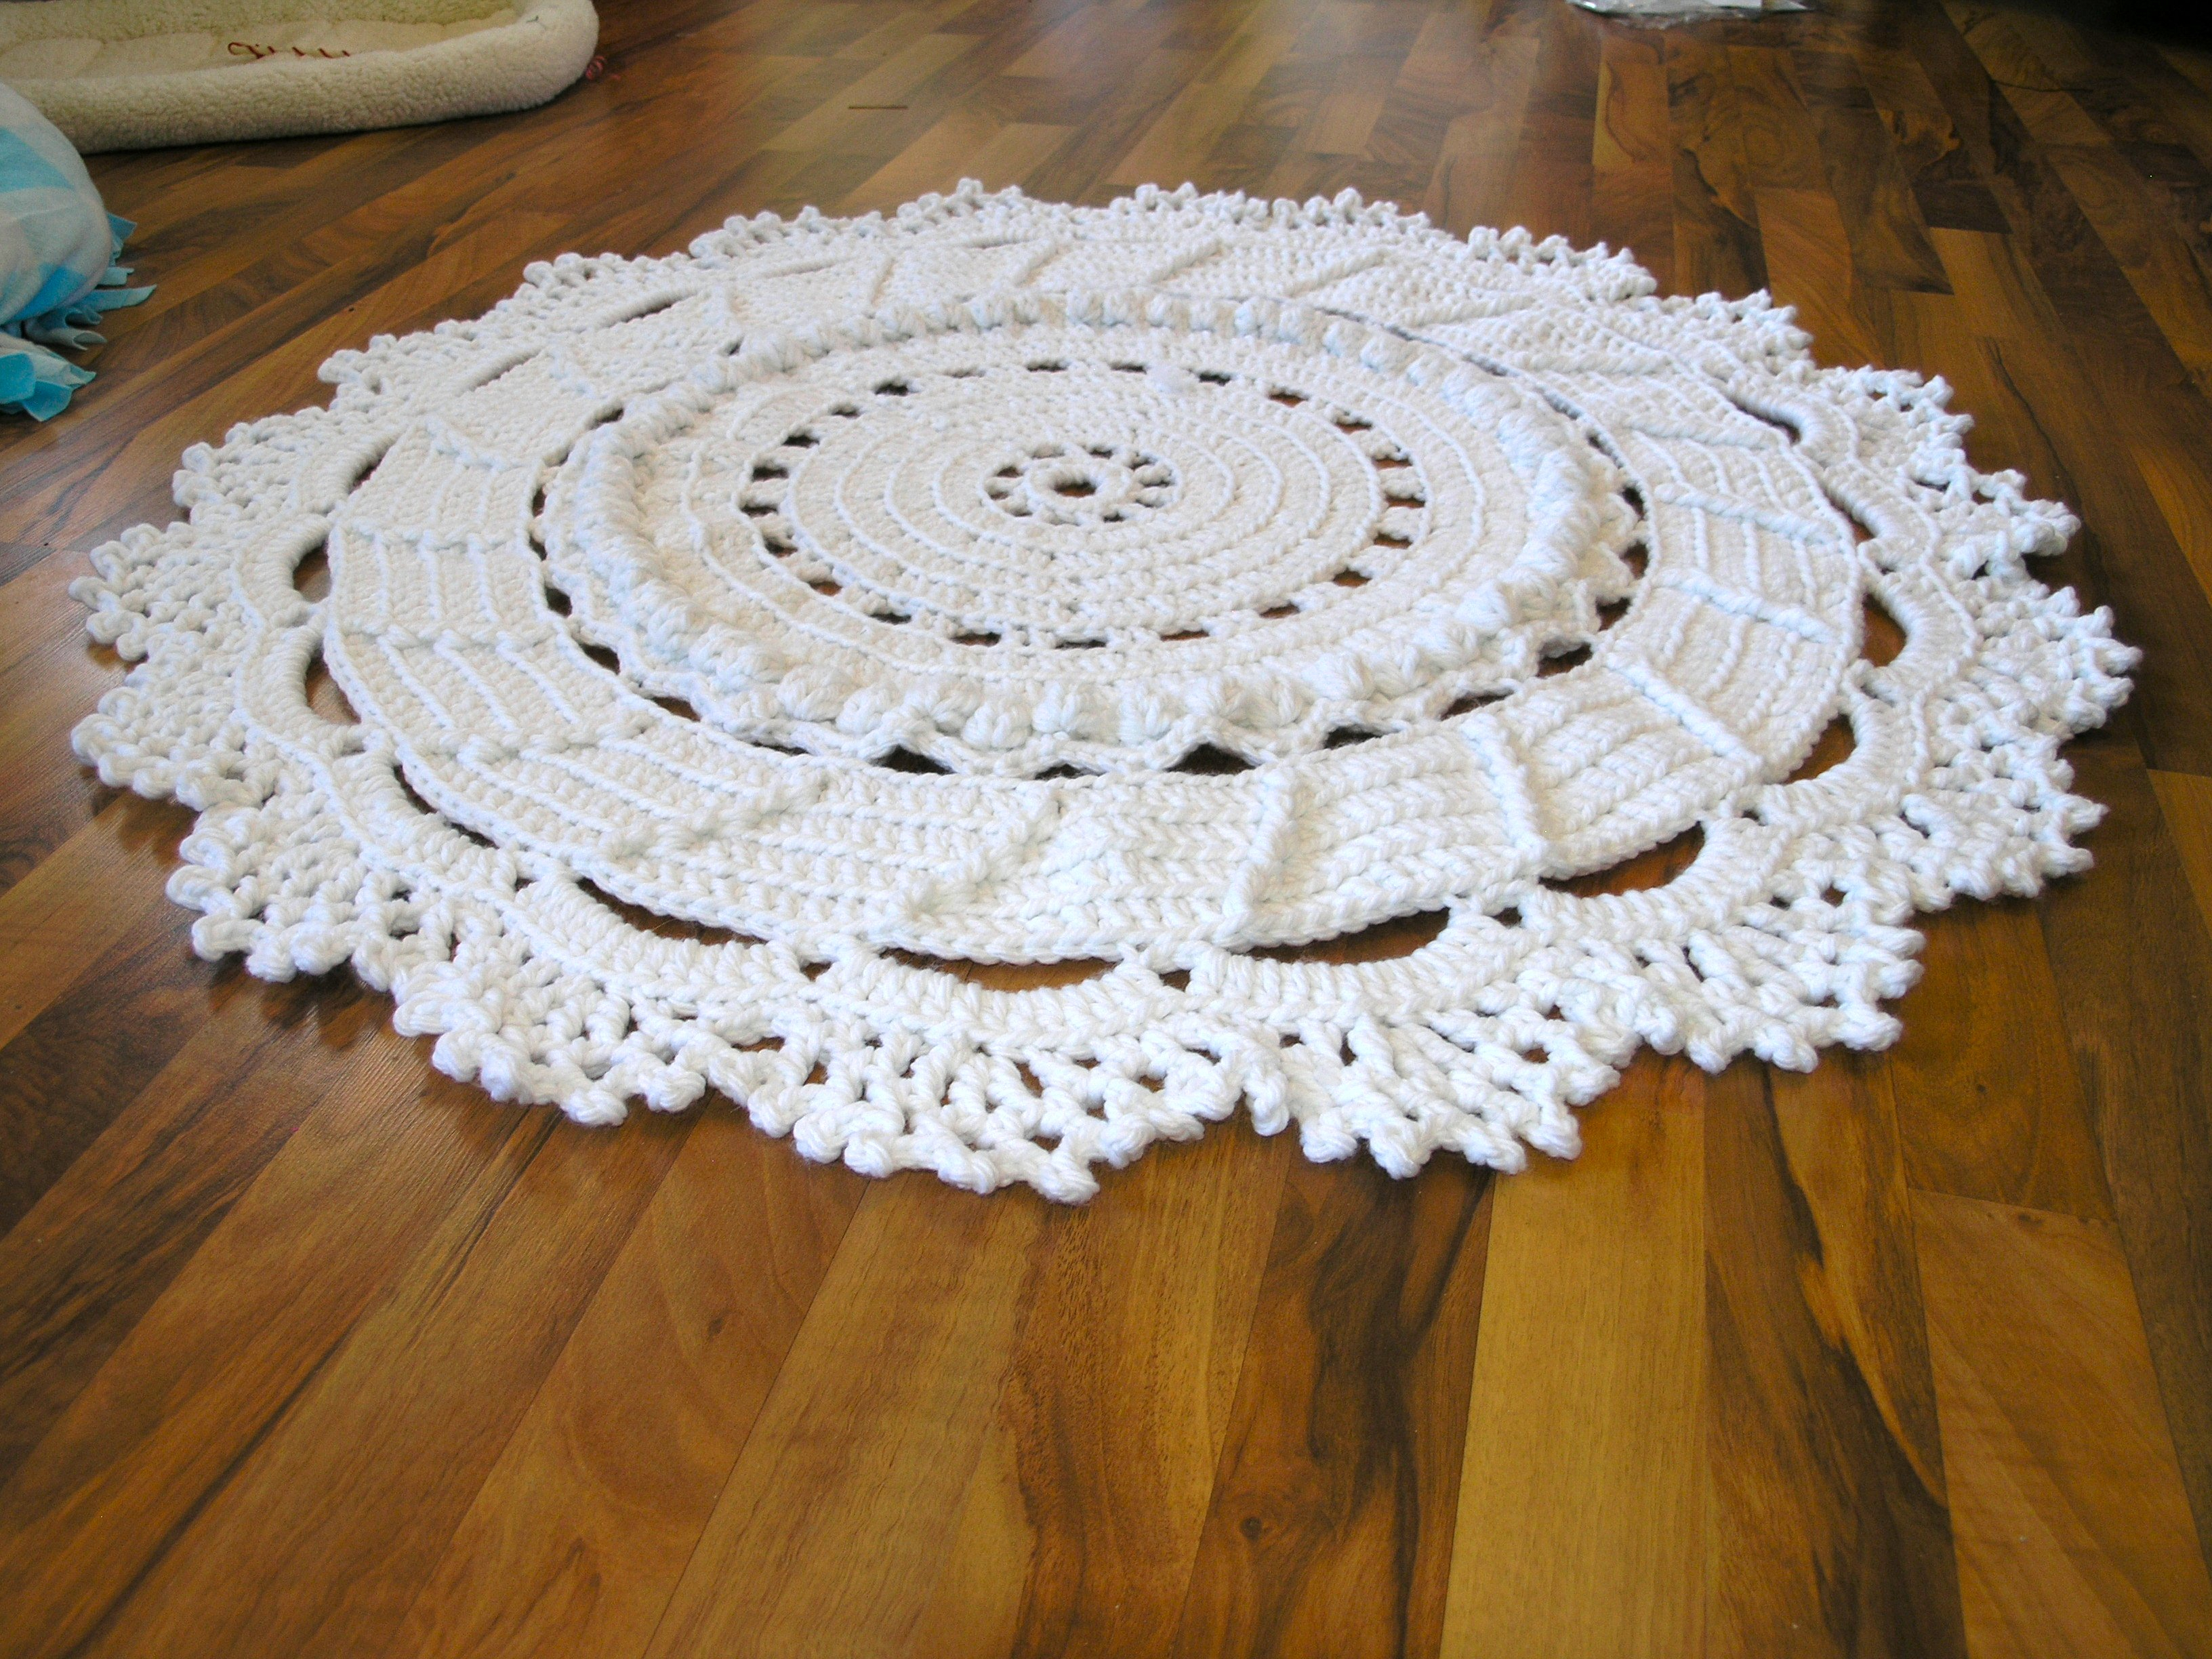 Crochet Rug Pattern Dances With Wools Blog Archive A Giant Crochet Doily Rug For Our